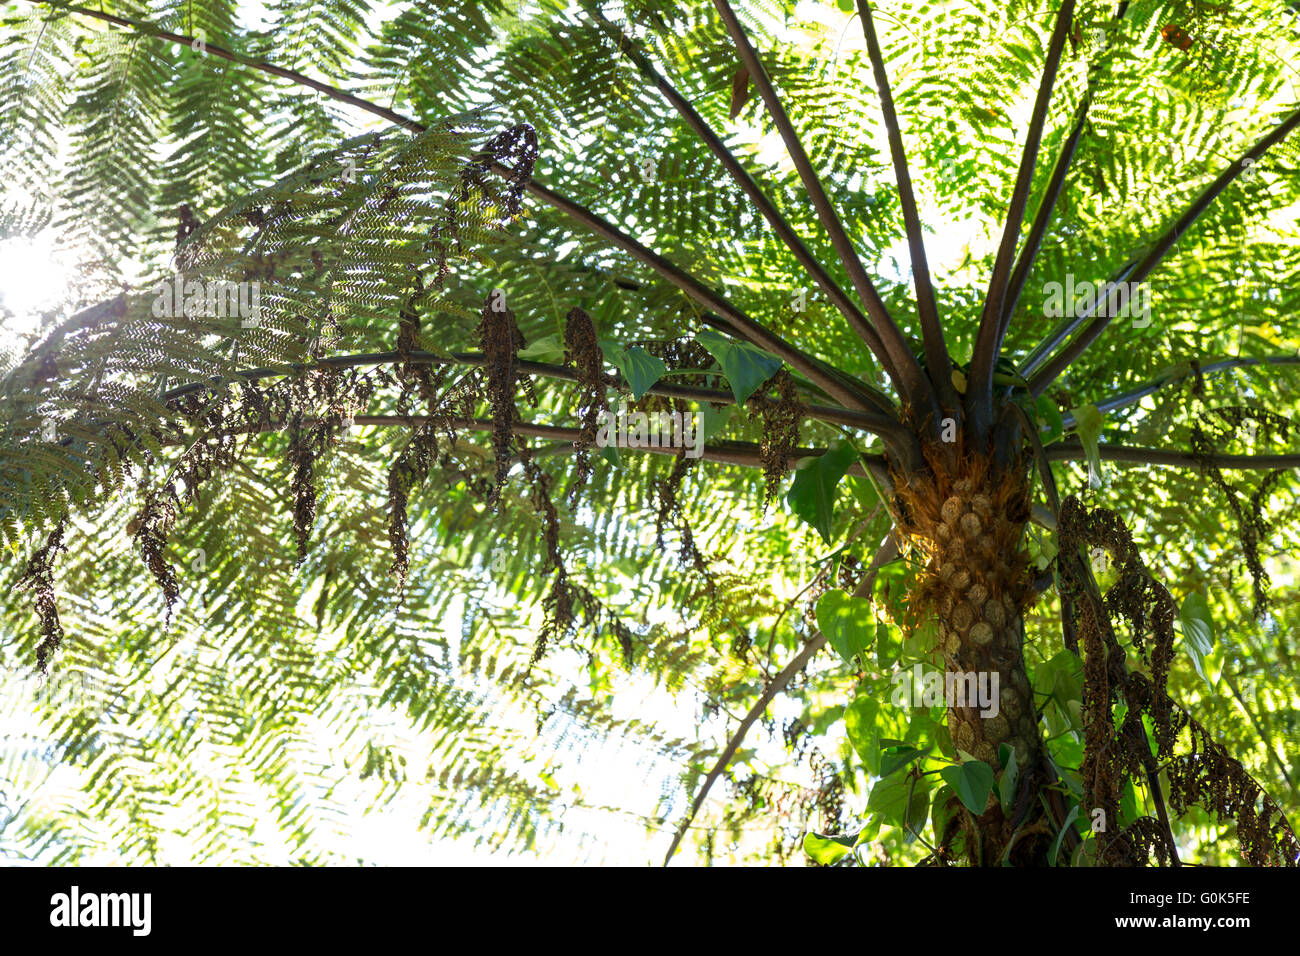 Sao Paulo, Brazil. 1st May, 2016. Xaxim or samambaiaçu (Dicksonia sellowiana) an arborescent fern is seen during this sunny day in Cantareira State Park (Portuguese: Parque Estadual da Cantareira) in Sao Paulo, Brazil. Credit:  Andre M. Chang/ARDUOPRESS/Alamy Live News Stock Photo